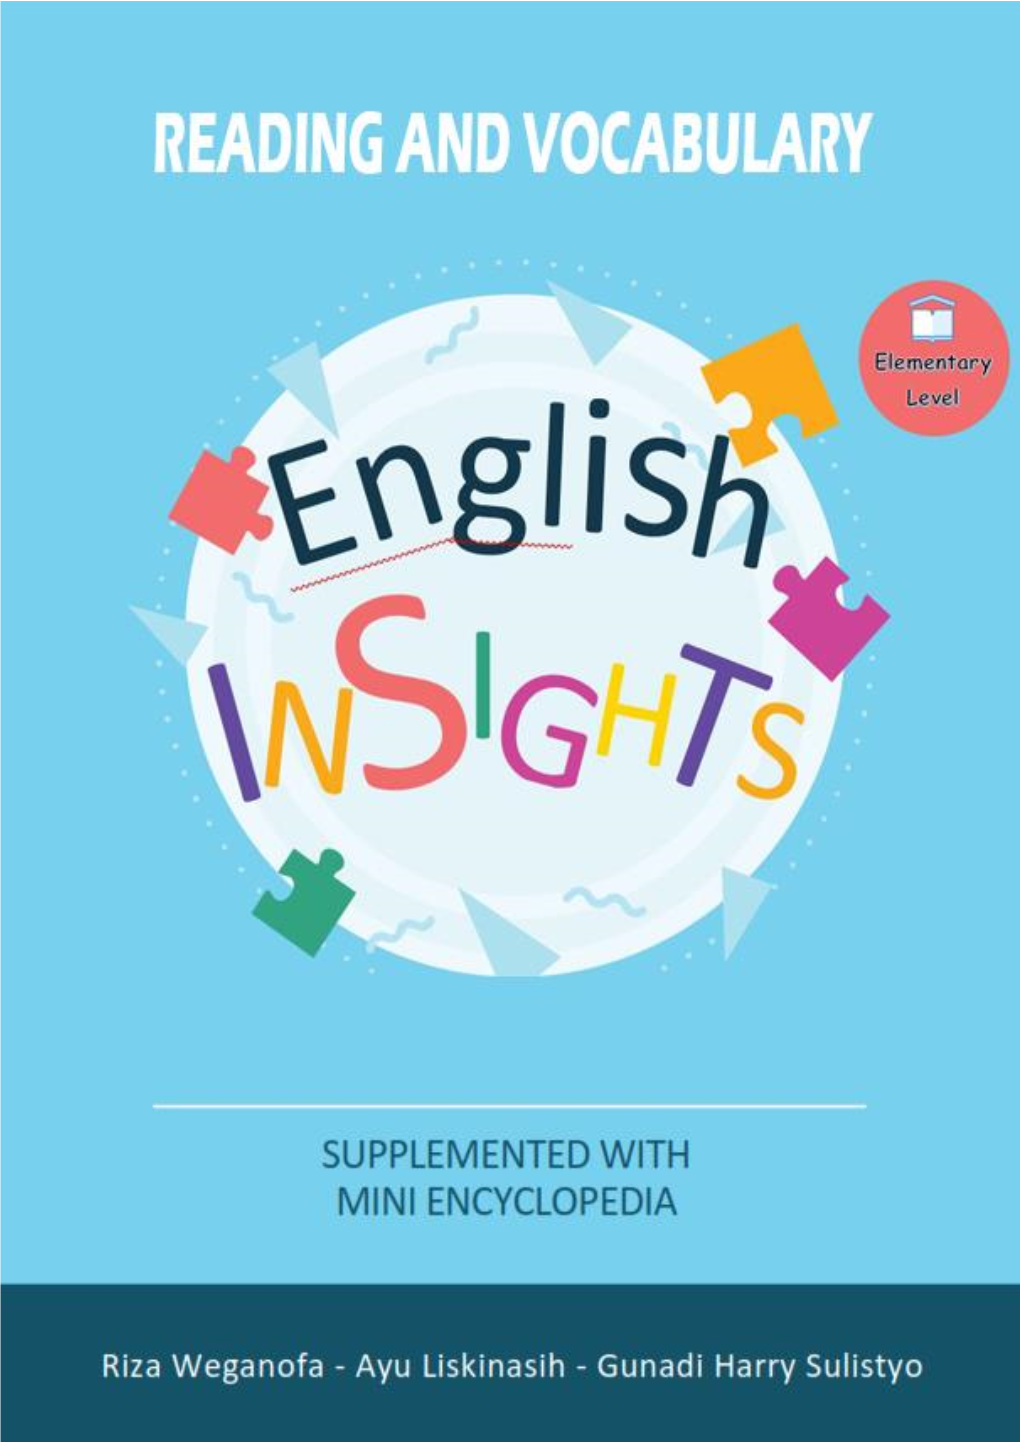 English Insights Elementary Level Reading and Vocabulary Workbook Supplemented with Mini Encyclopedia